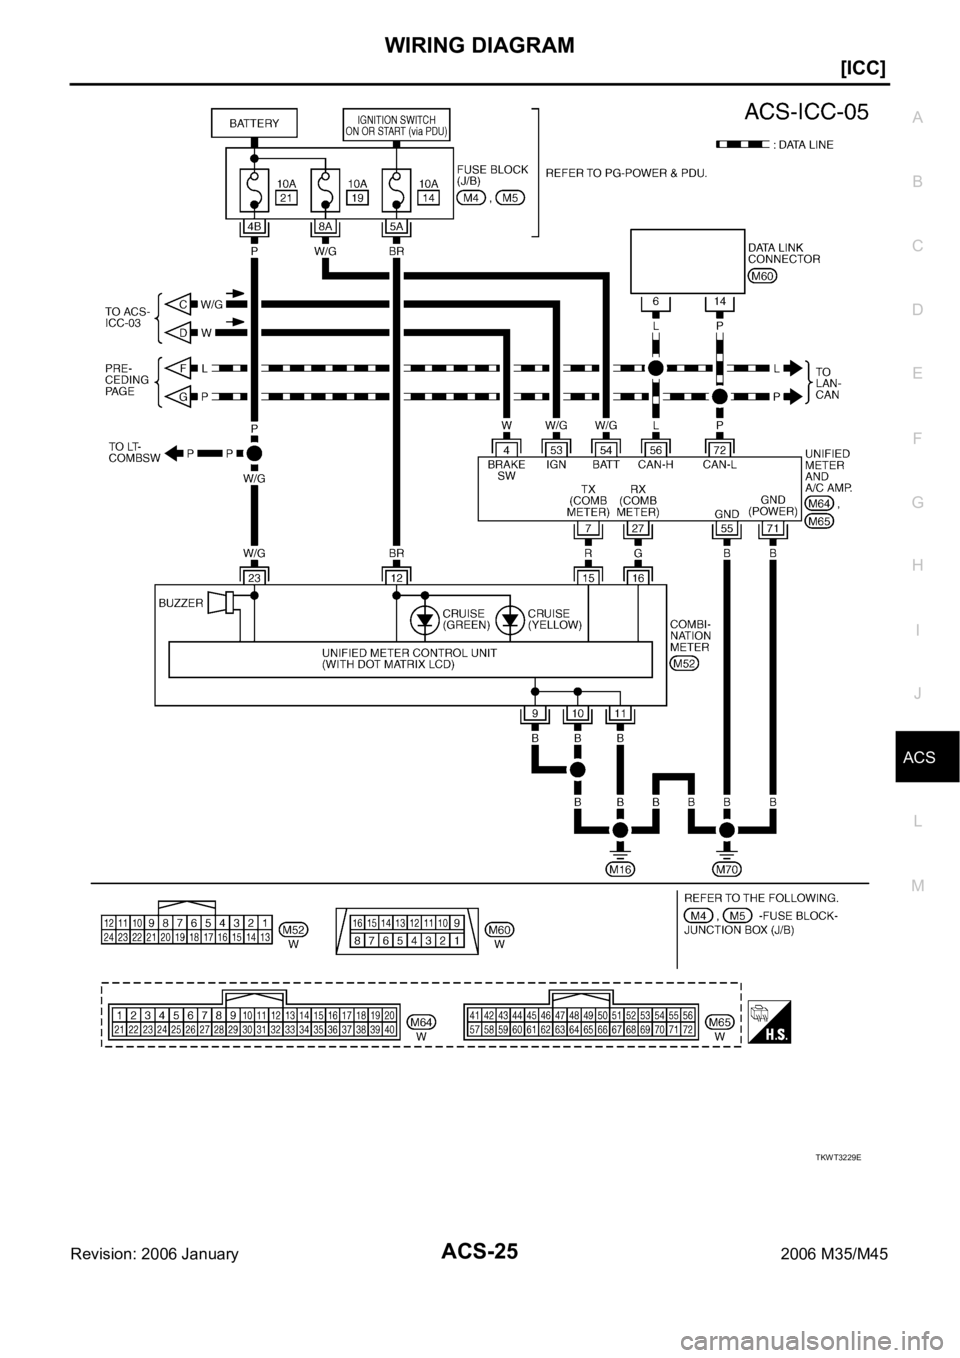 INFINITI M35 2006  Factory Owners Guide WIRING DIAGRAM
ACS-25
[ICC]
C
D
E
F
G
H
I
J
L
MA
B
ACS
Revision: 2006 January2006 M35/M45
TKWT3229E 